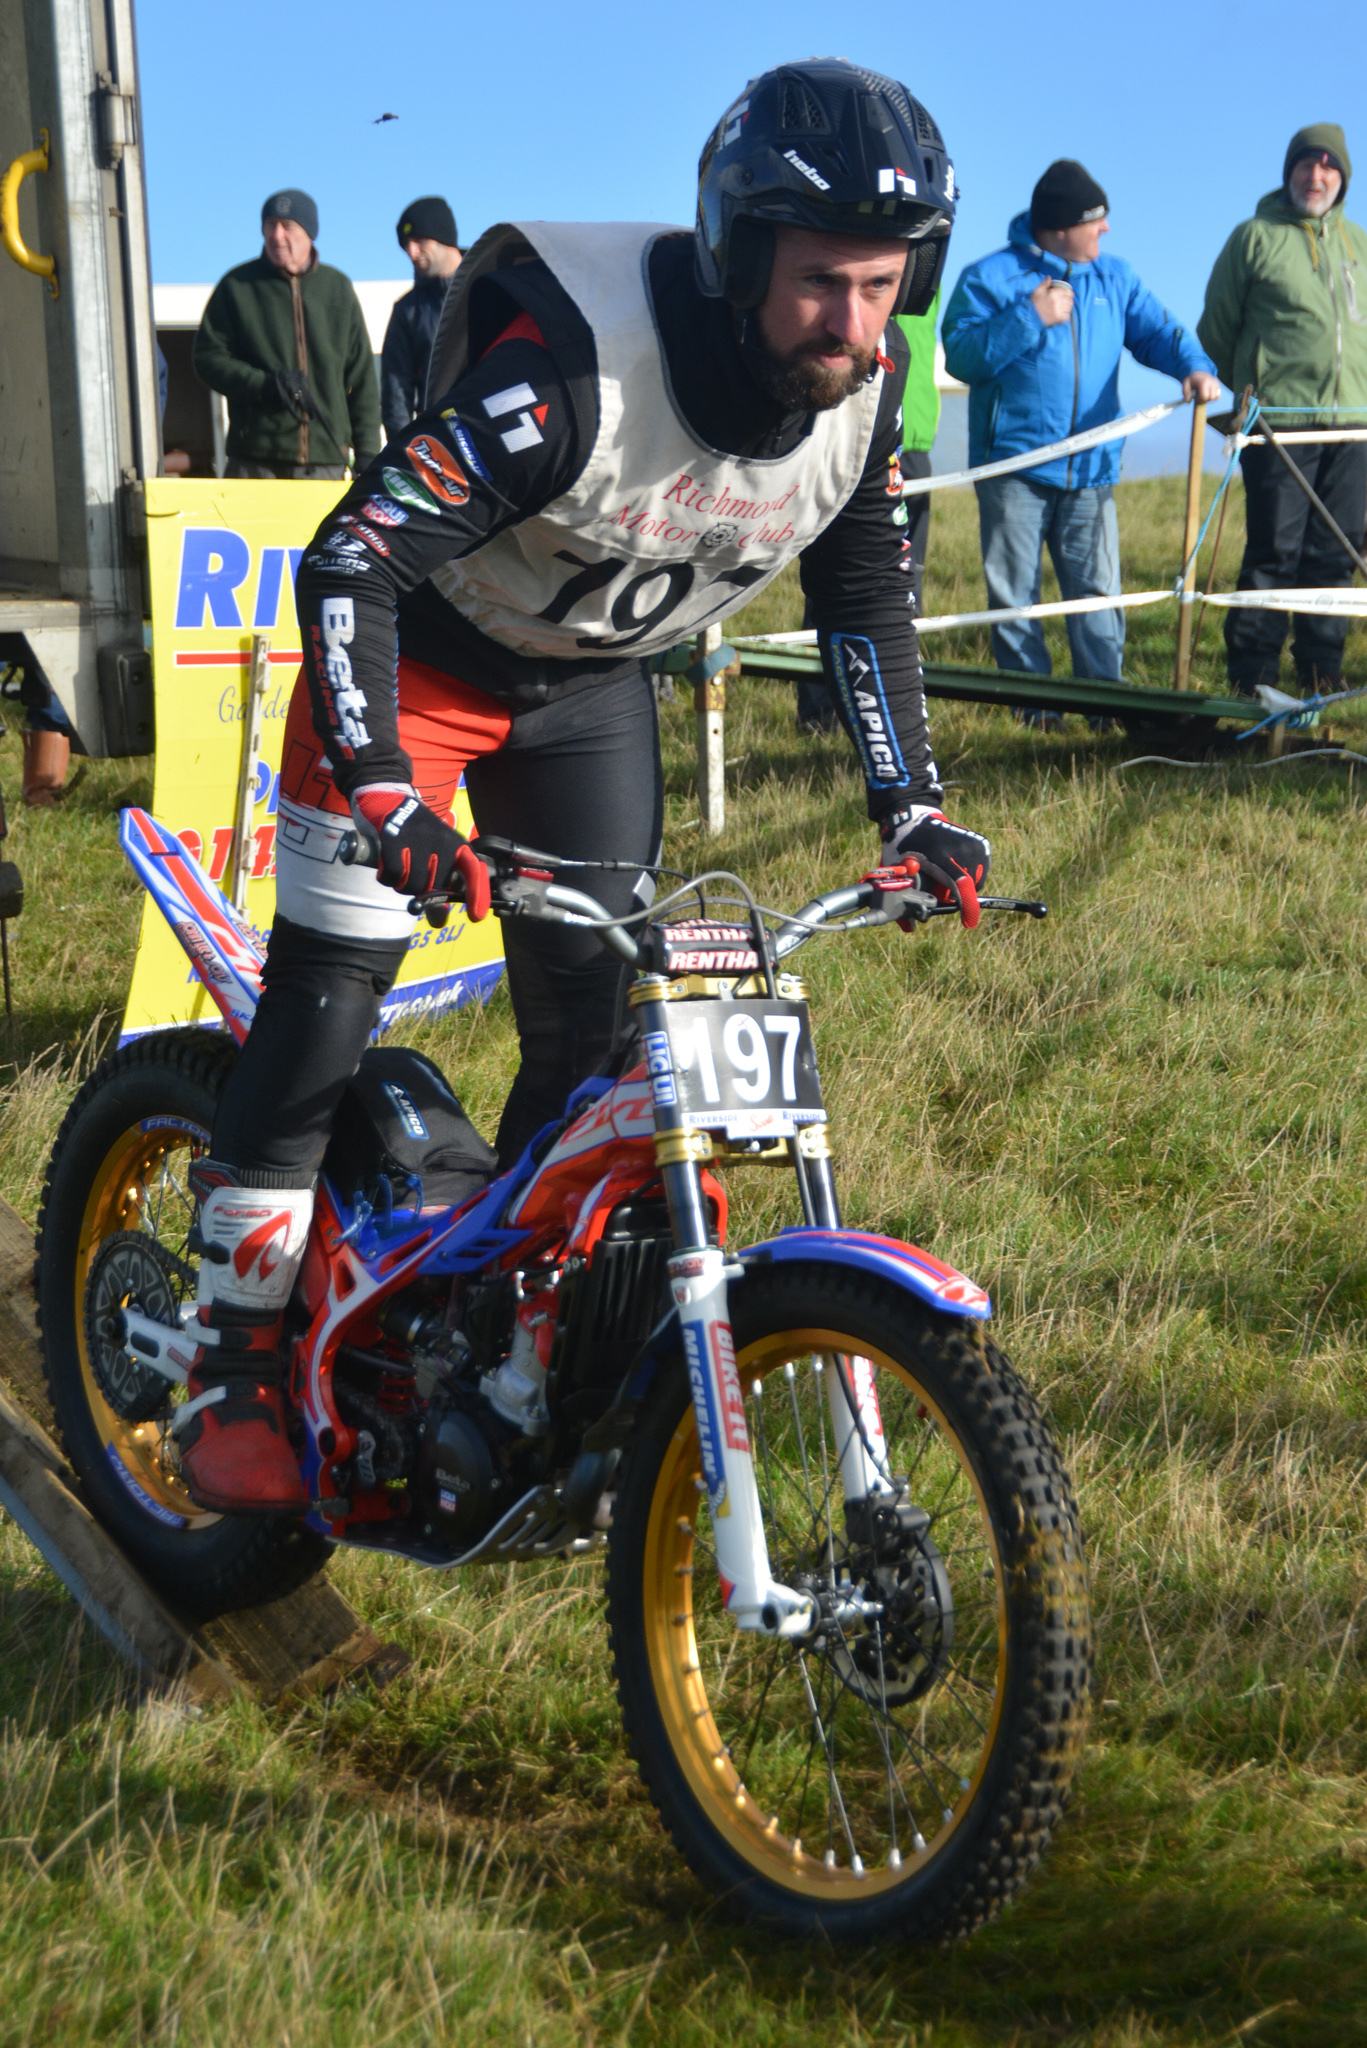 James Dabill, second place in the Scott Trial